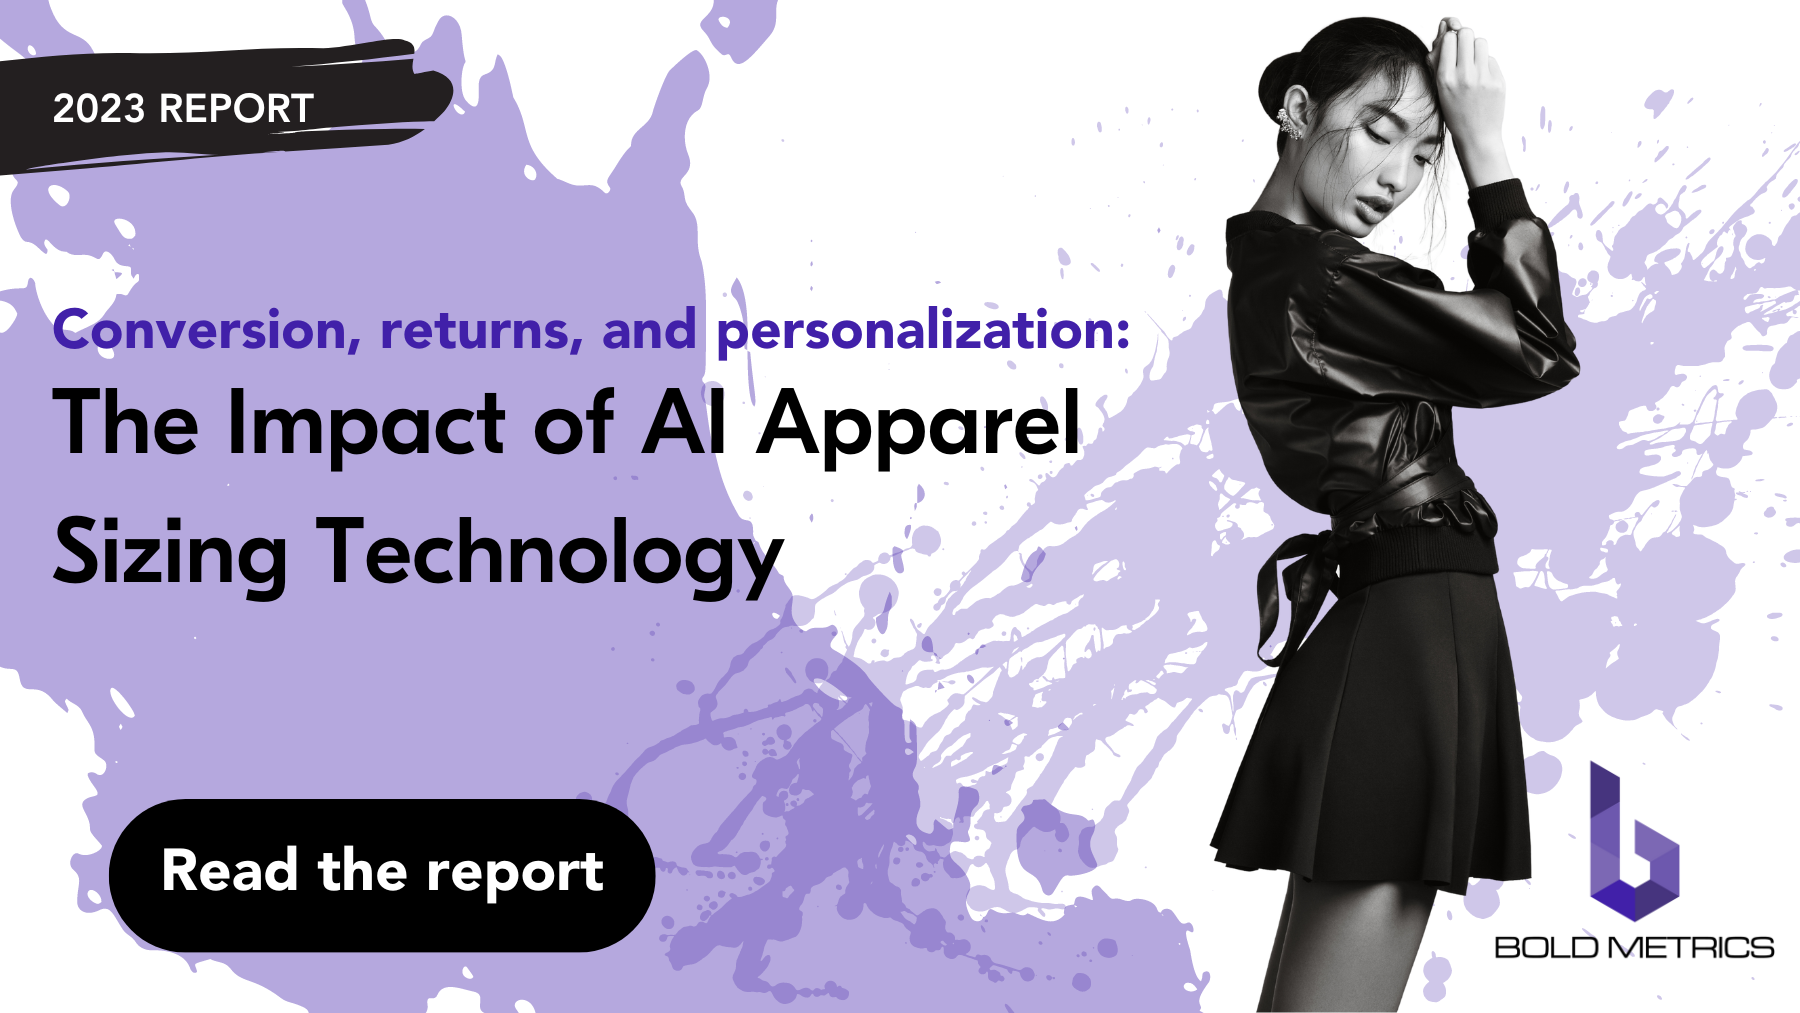 Conversion, Returns, and Personalization: The Impact of AI Apparel Sizing Technology.